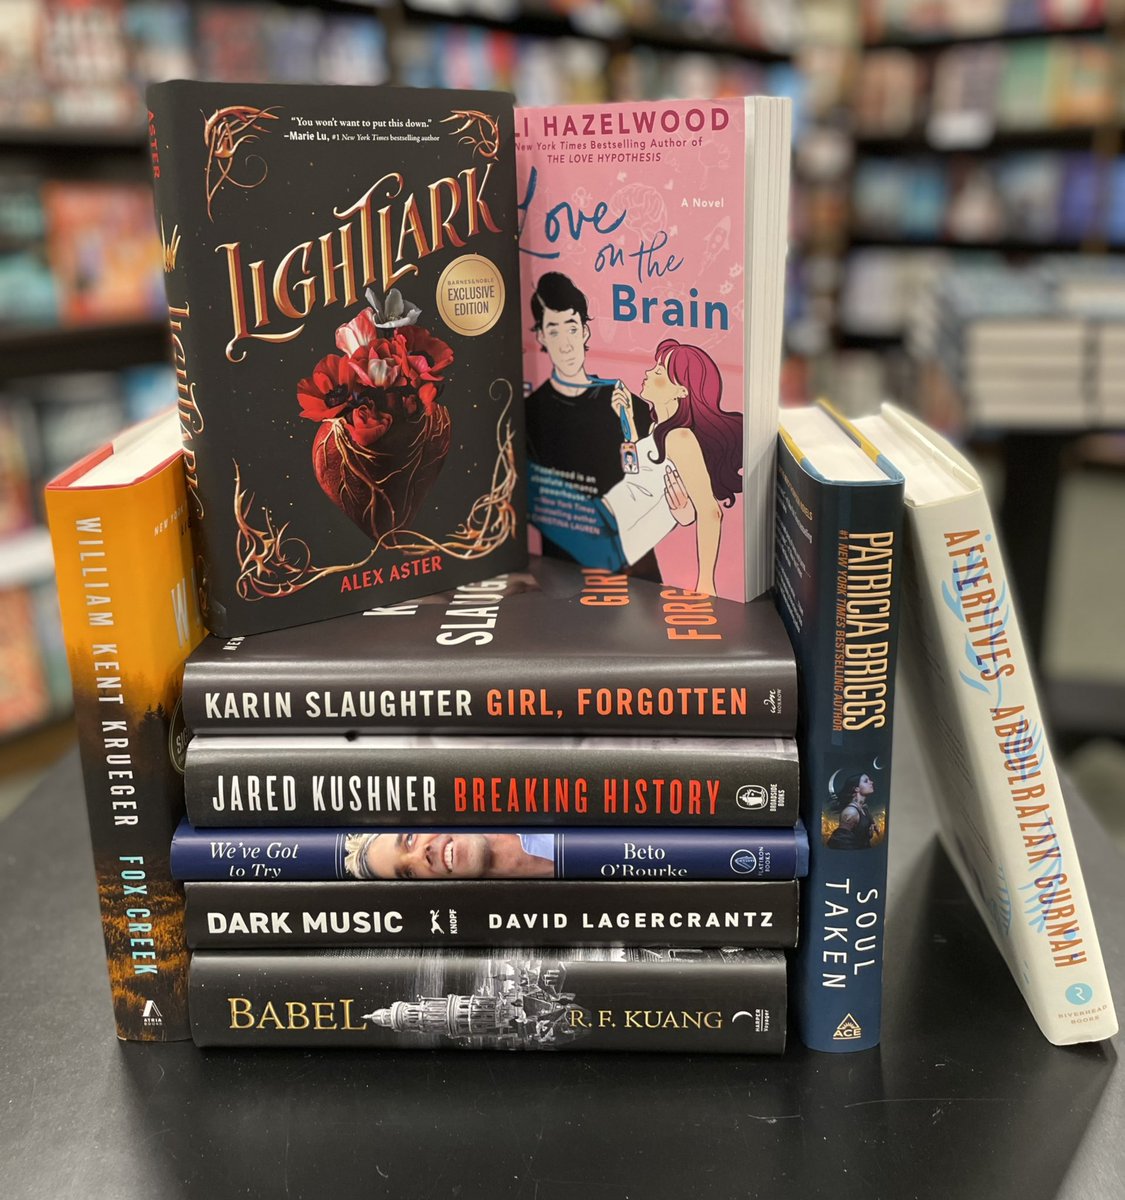 Lots of great new releases came out today! While you’re here don’t forget our #bnbookhaul is still going on! 50% off of hundreds of hard cover books through 9/5. @byalexaster @SlaughterKarin @kuangrf #book